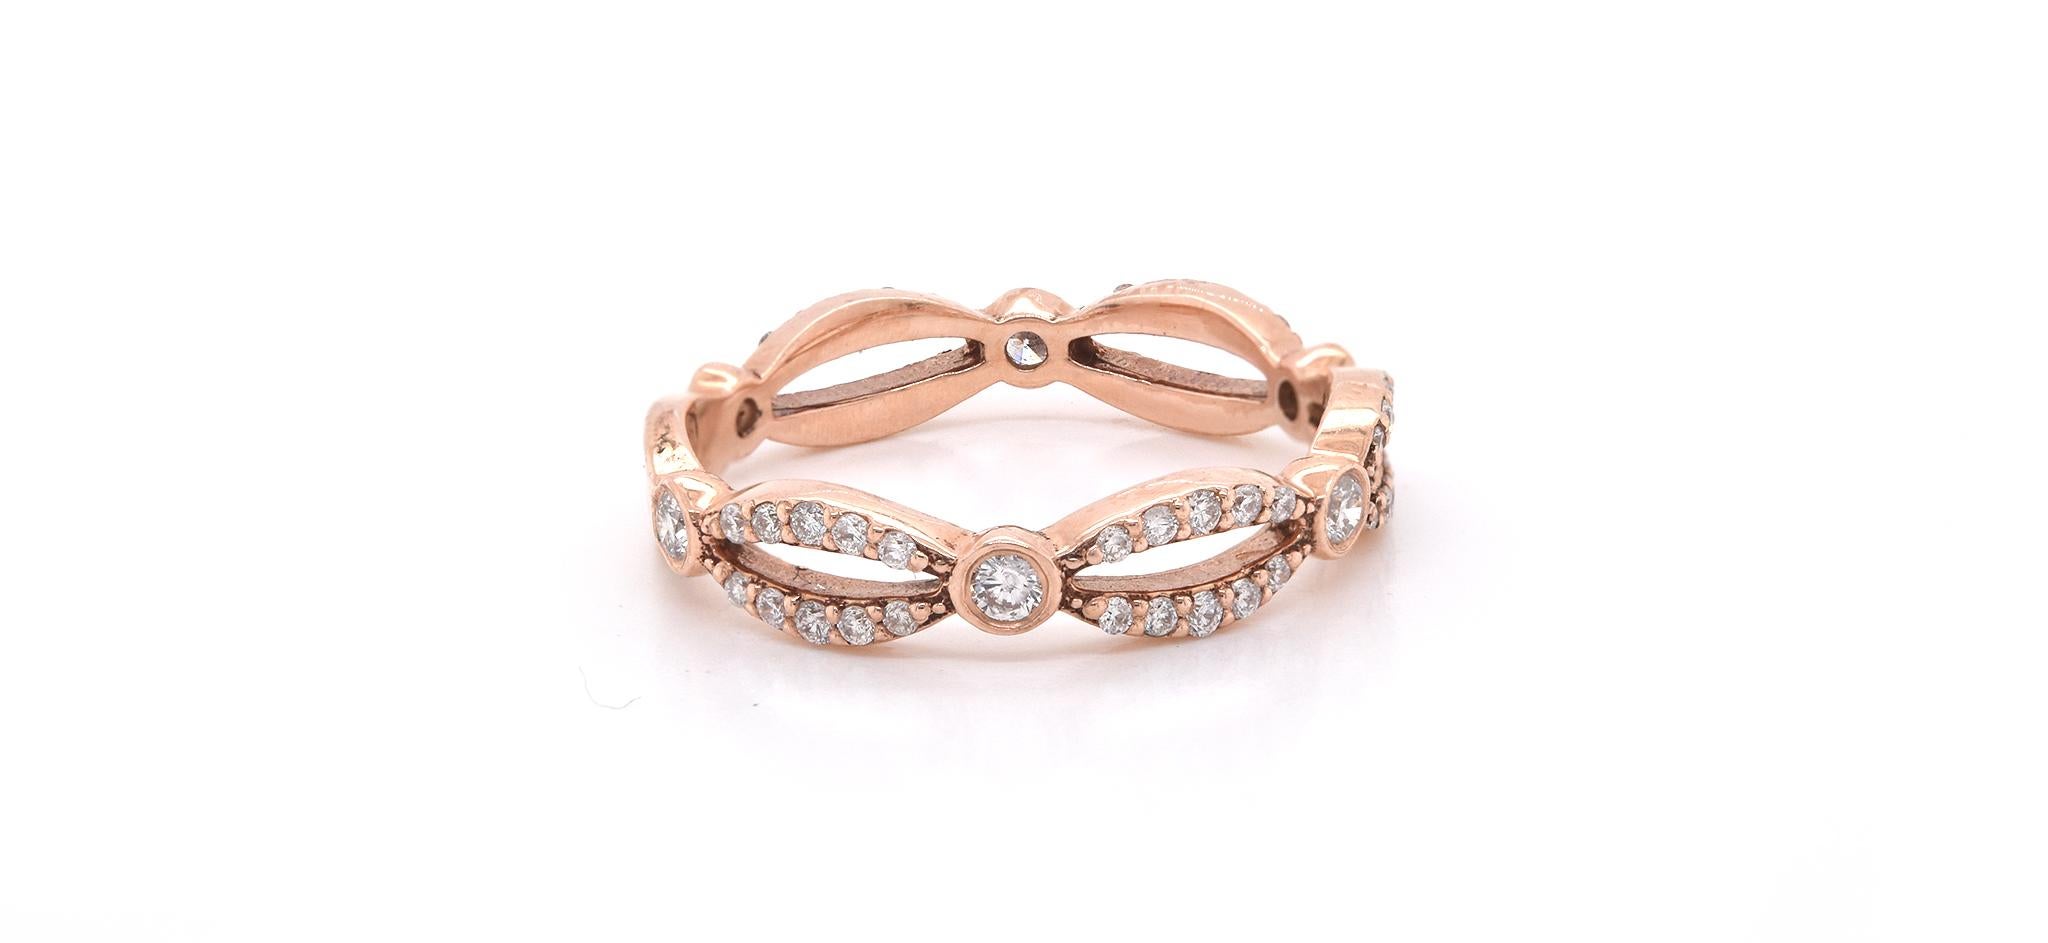 Material: 14k rose gold
Diamonds: 56 round brilliant cuts = 0.48cttw
Color: H-I
Clarity: SI1
Size: 7 
Dimensions: ring measures 4.20mm in width
Weight: 2.80 grams
